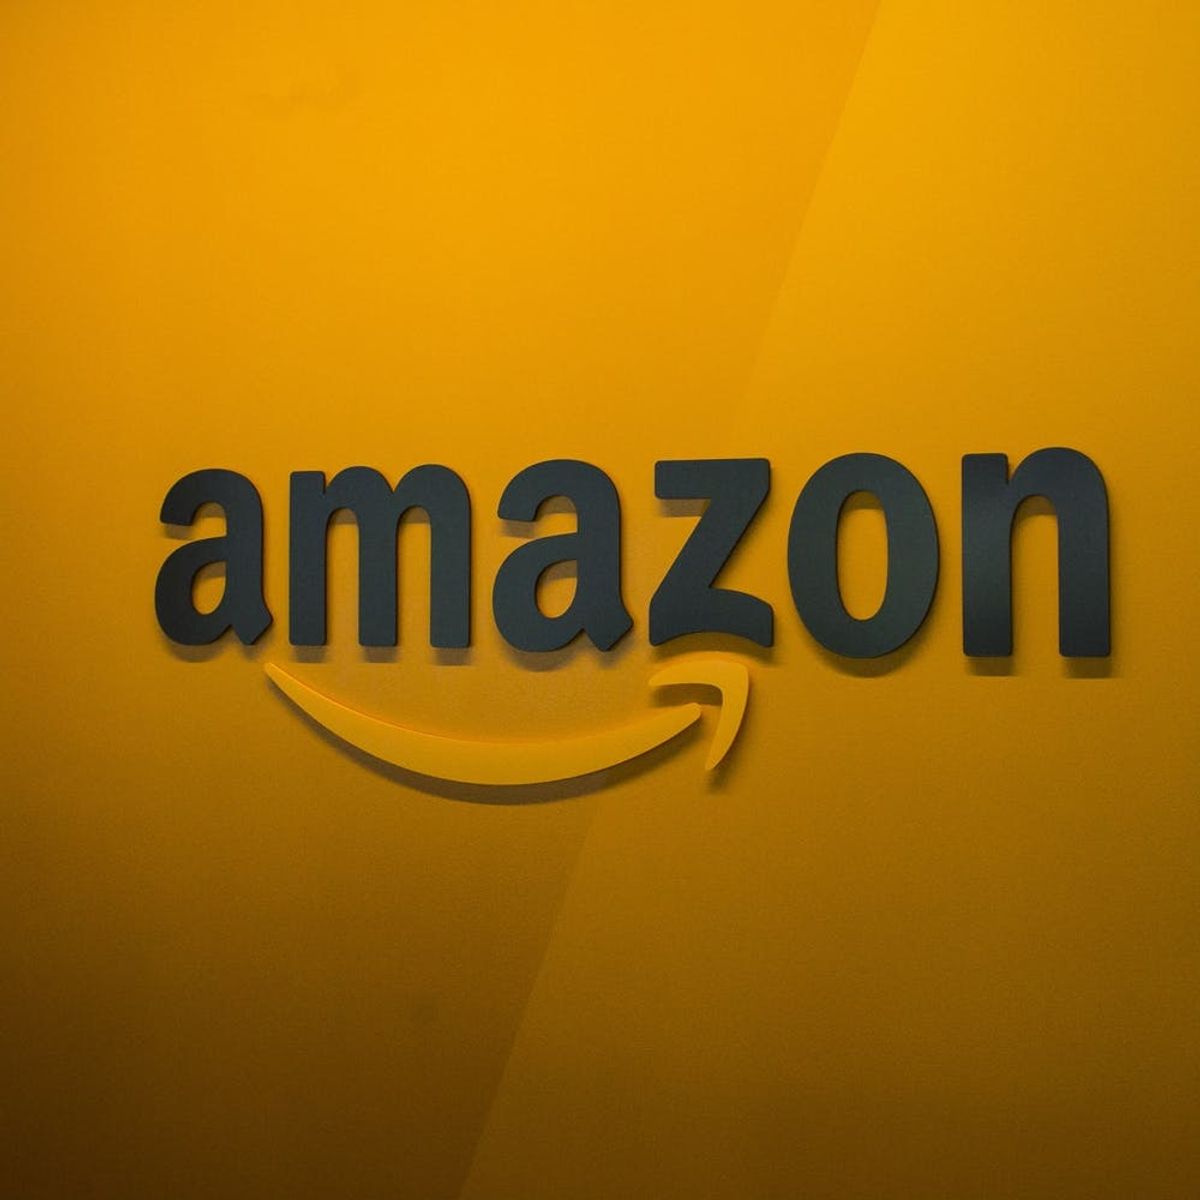 Amazon Just Raised Its Prime Membership Rates for the First Time in 4 Years